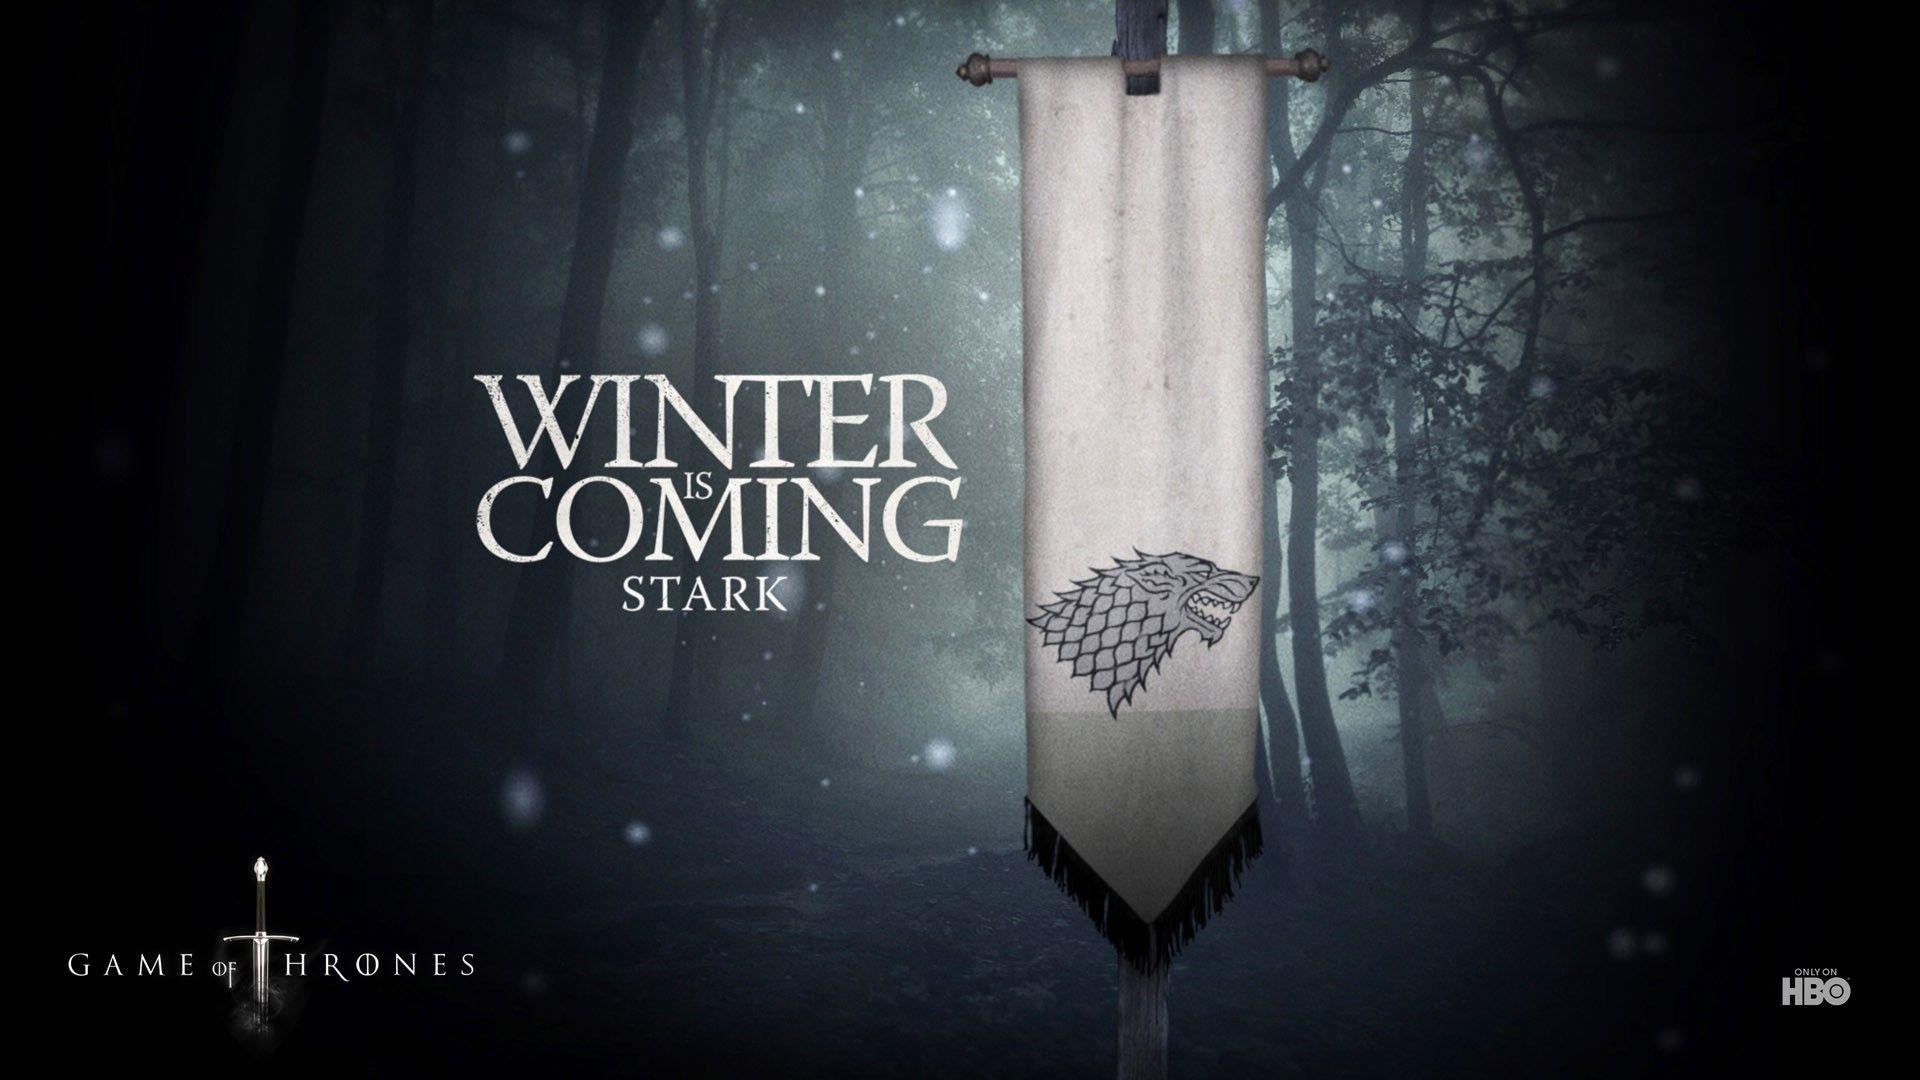 Winter is Coming- George Martin in a Game of Thrones